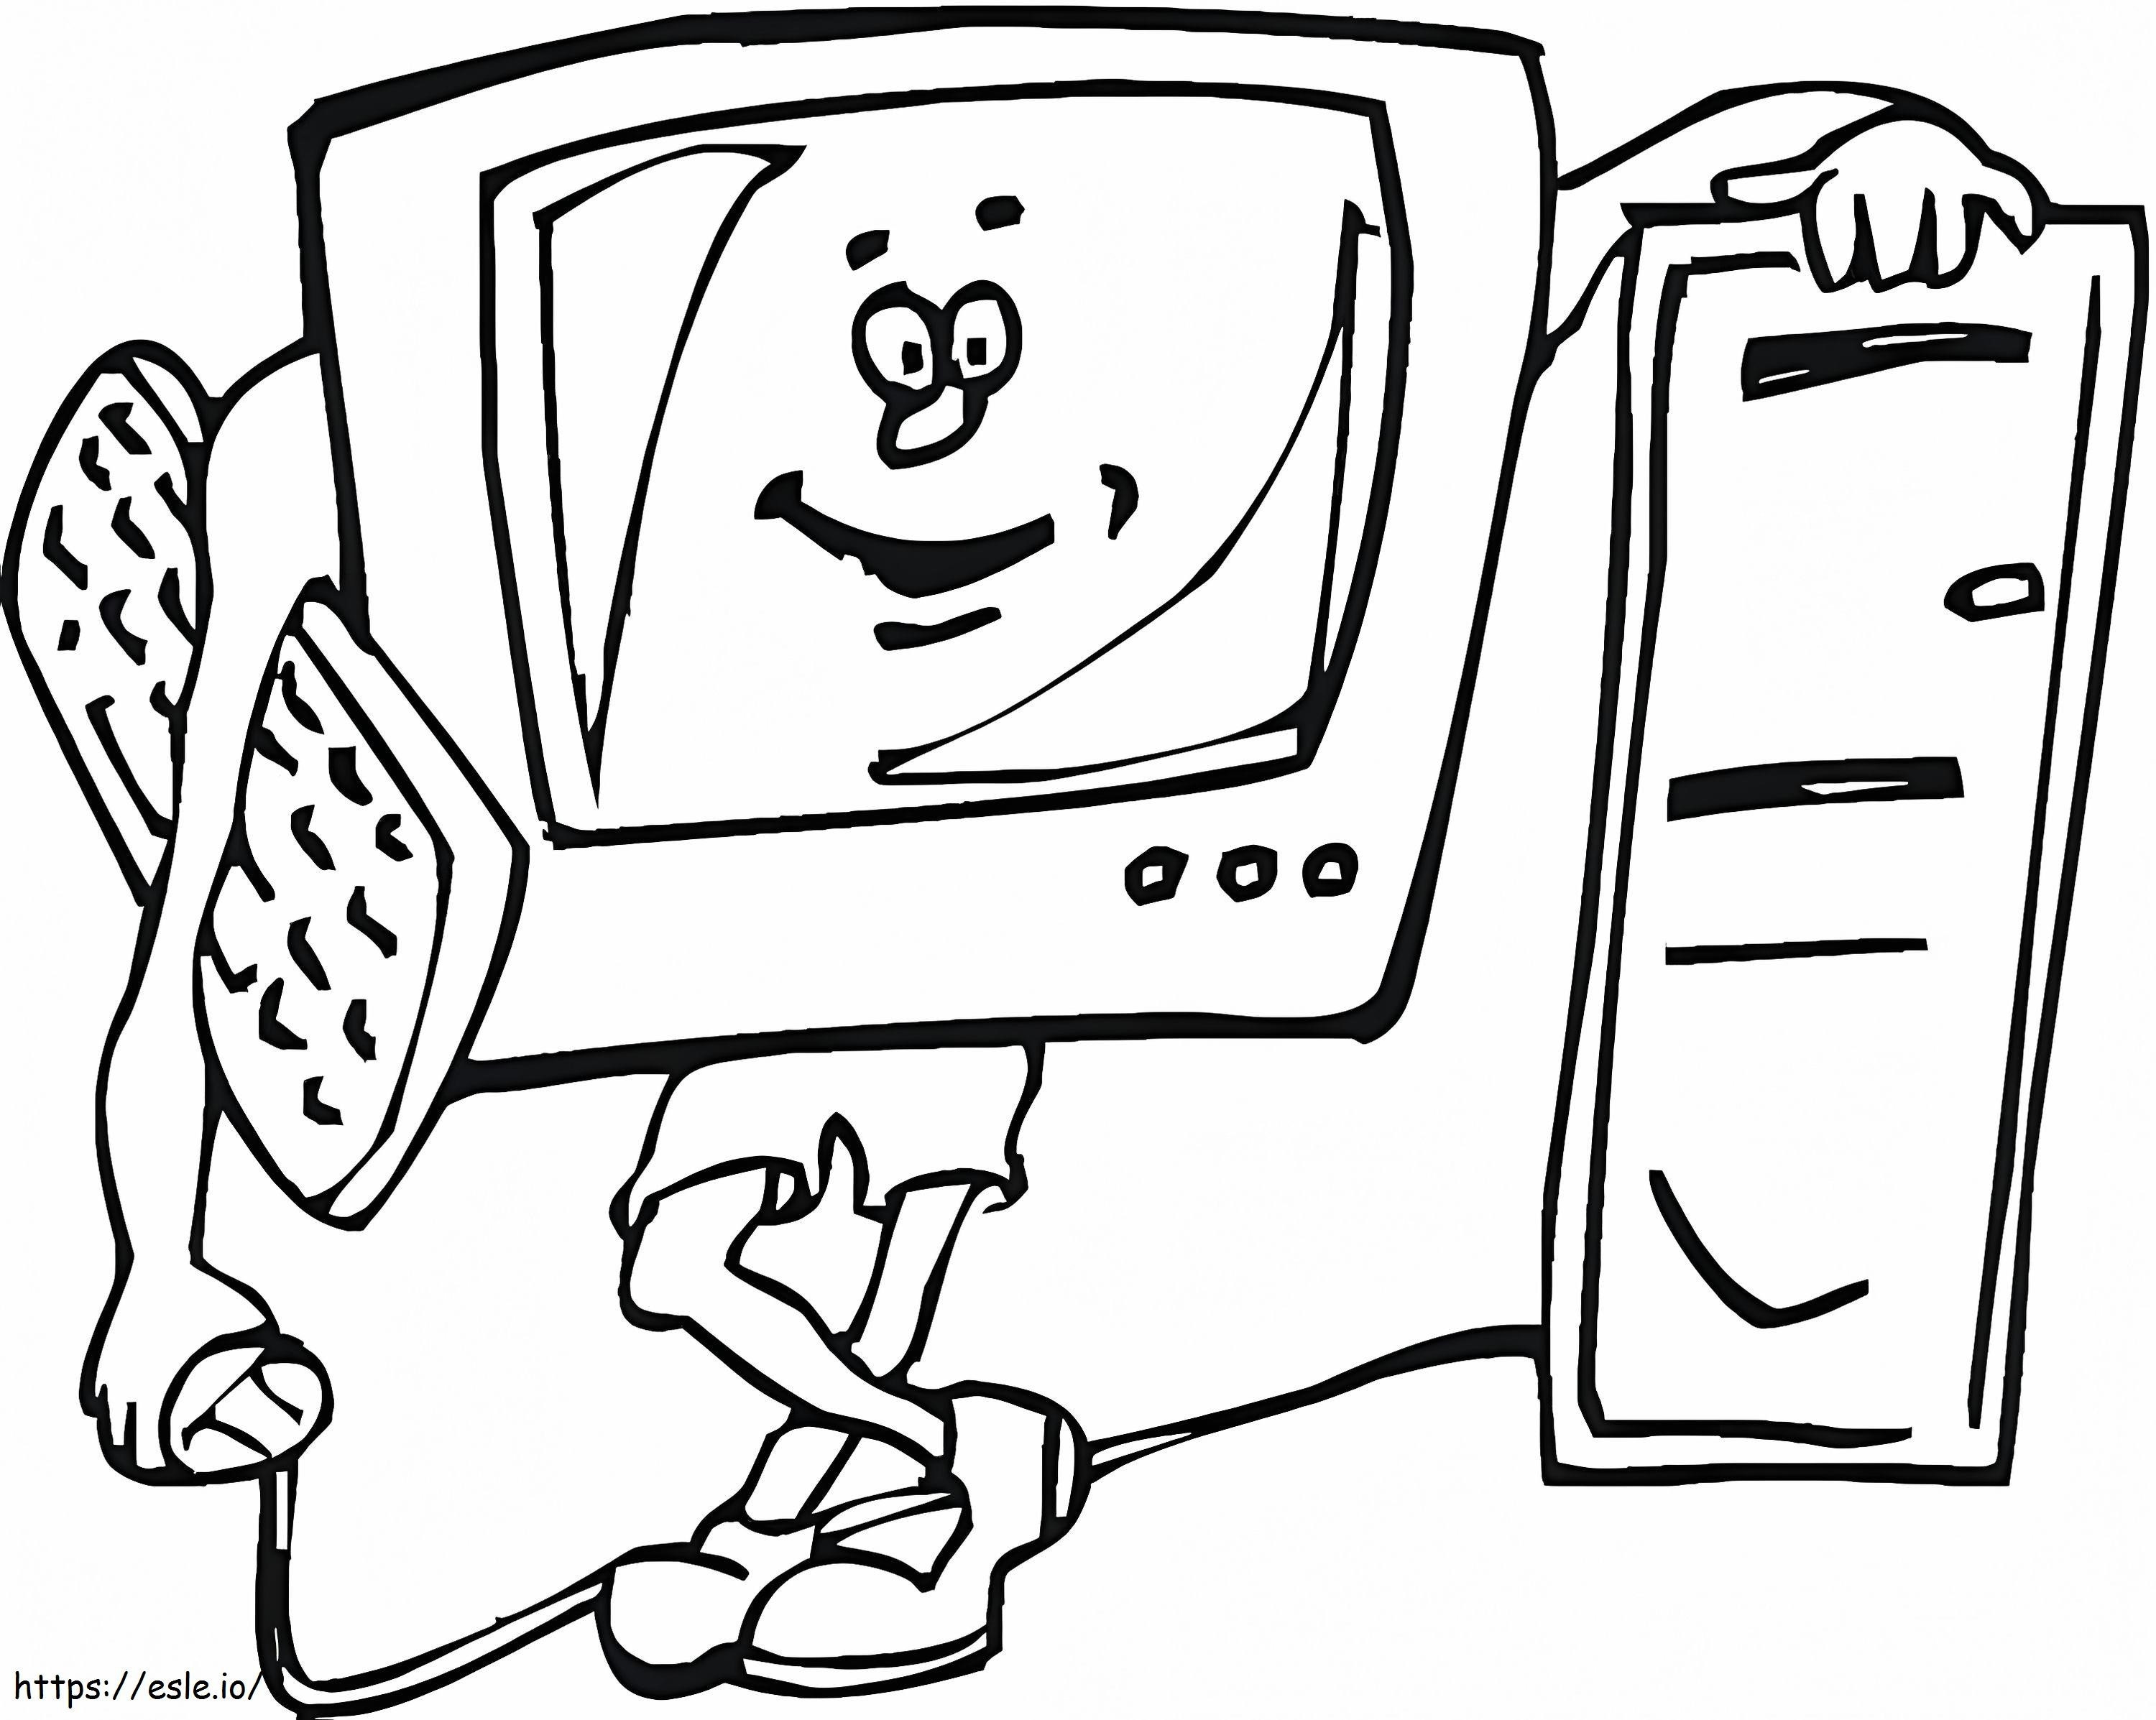 Animated Computer coloring page